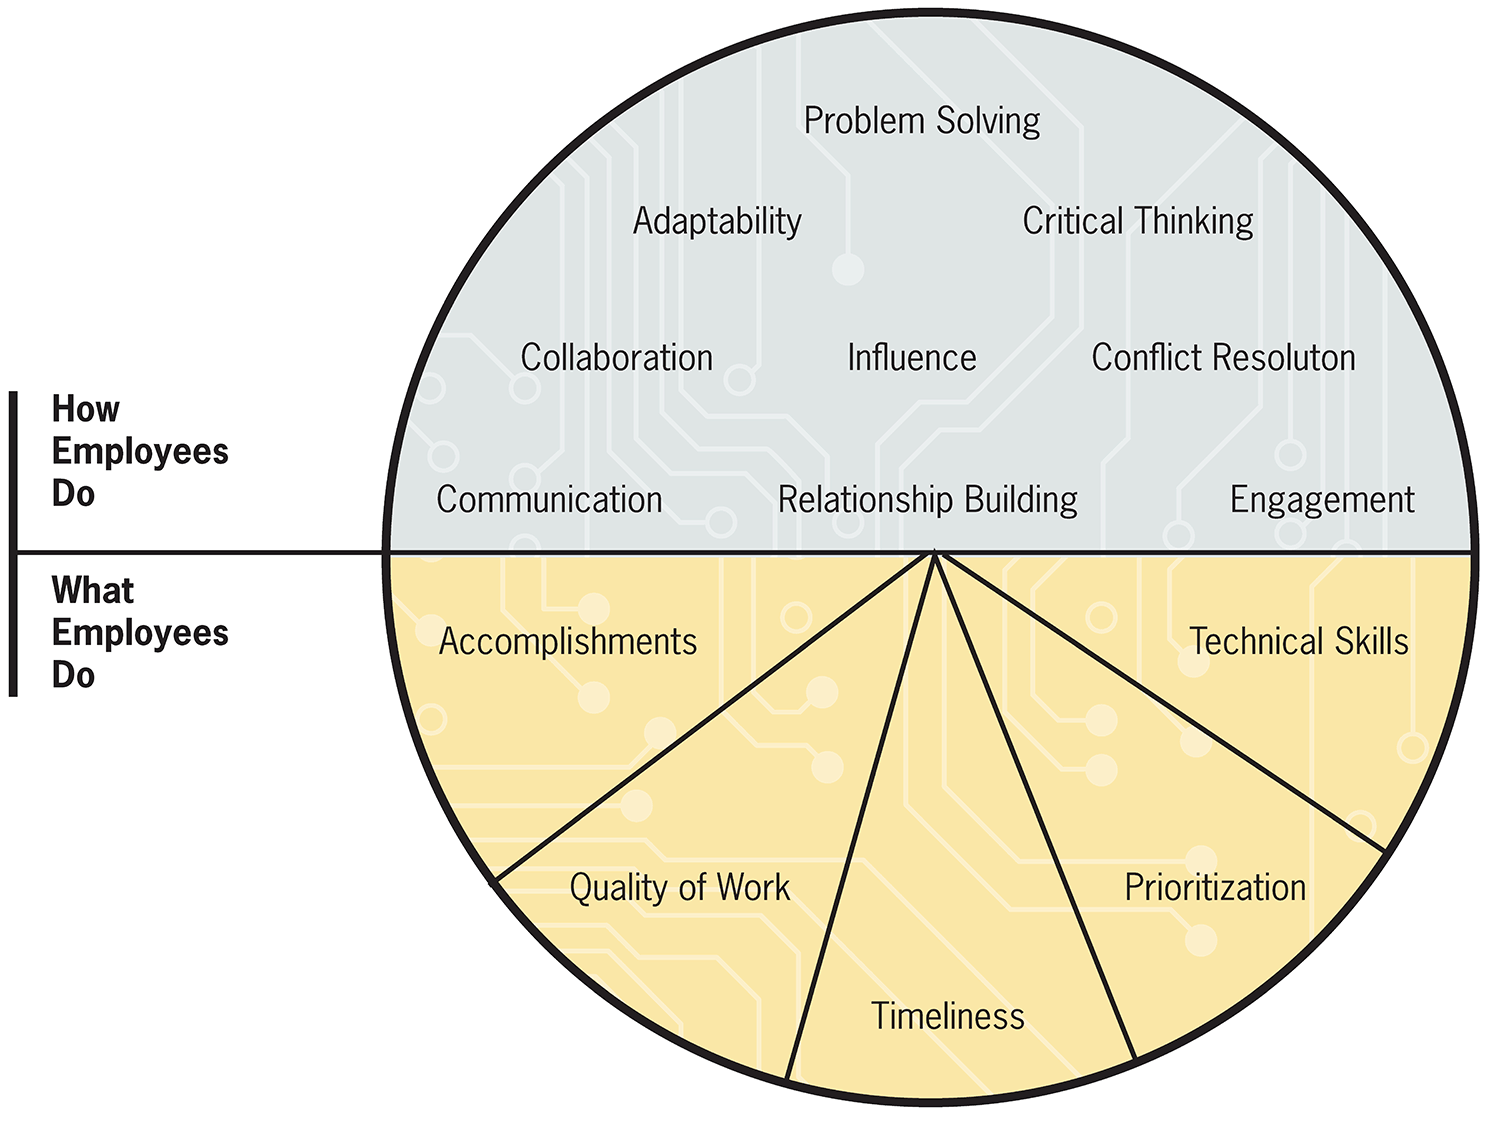 Circle split in half. Top half 'How Employees Do': Problem Solving, Adaptability, Critical Thinking, Collaboration, Influence, Conflict Resolution, Communication, Relationship Building, Engagement. Bottom half equally divided into 5 pie slices: Accomplishments, Quality of Work, Timliness, Prioritization, Technical Skills.